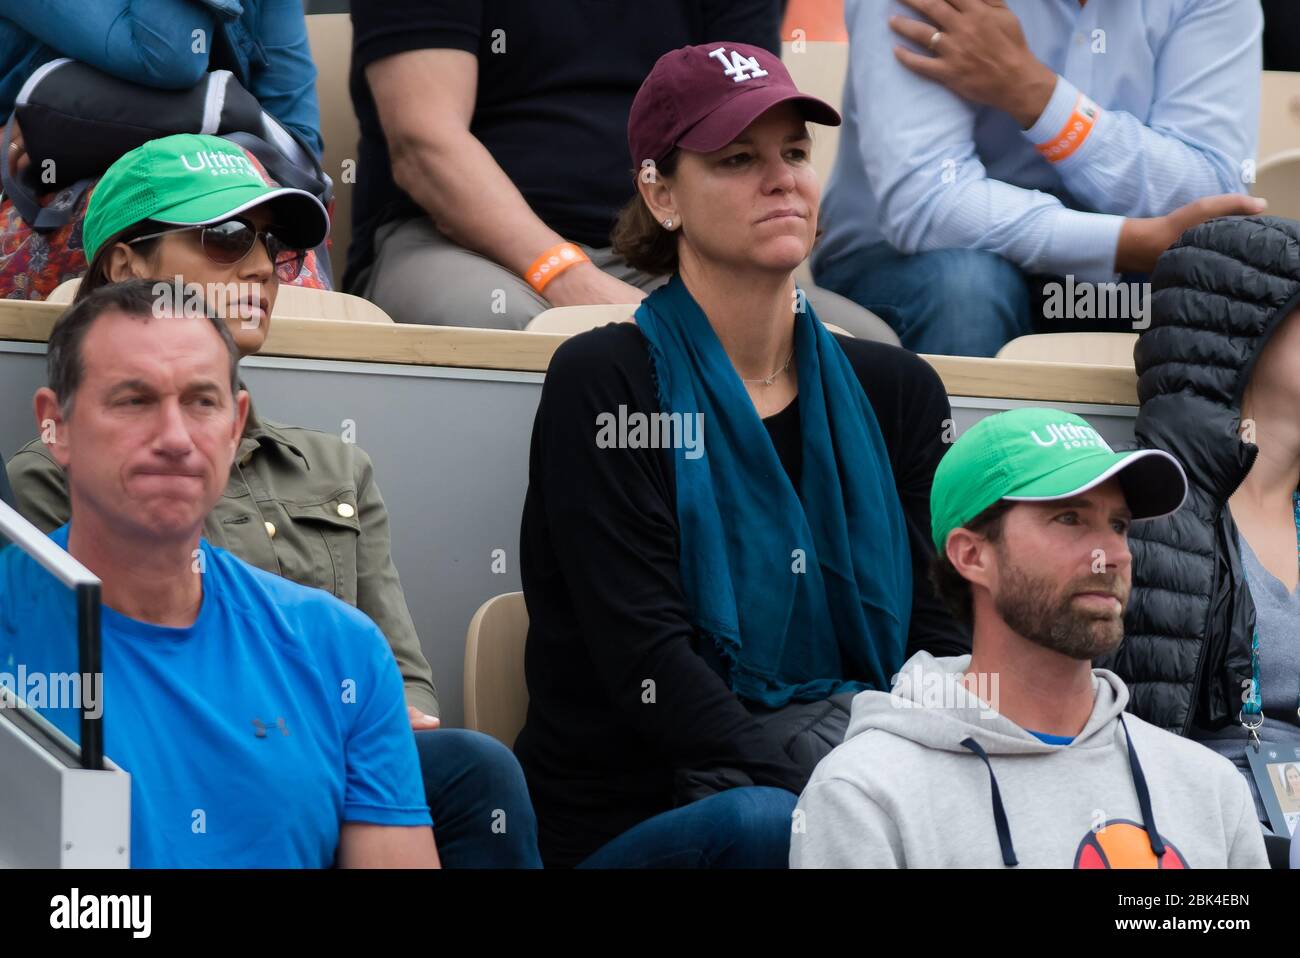 Lindsay Davenport watches Madison Keys during her fourth-round match at the 2019 Roland Garros Grand Slam tennis tournament Stock Photo